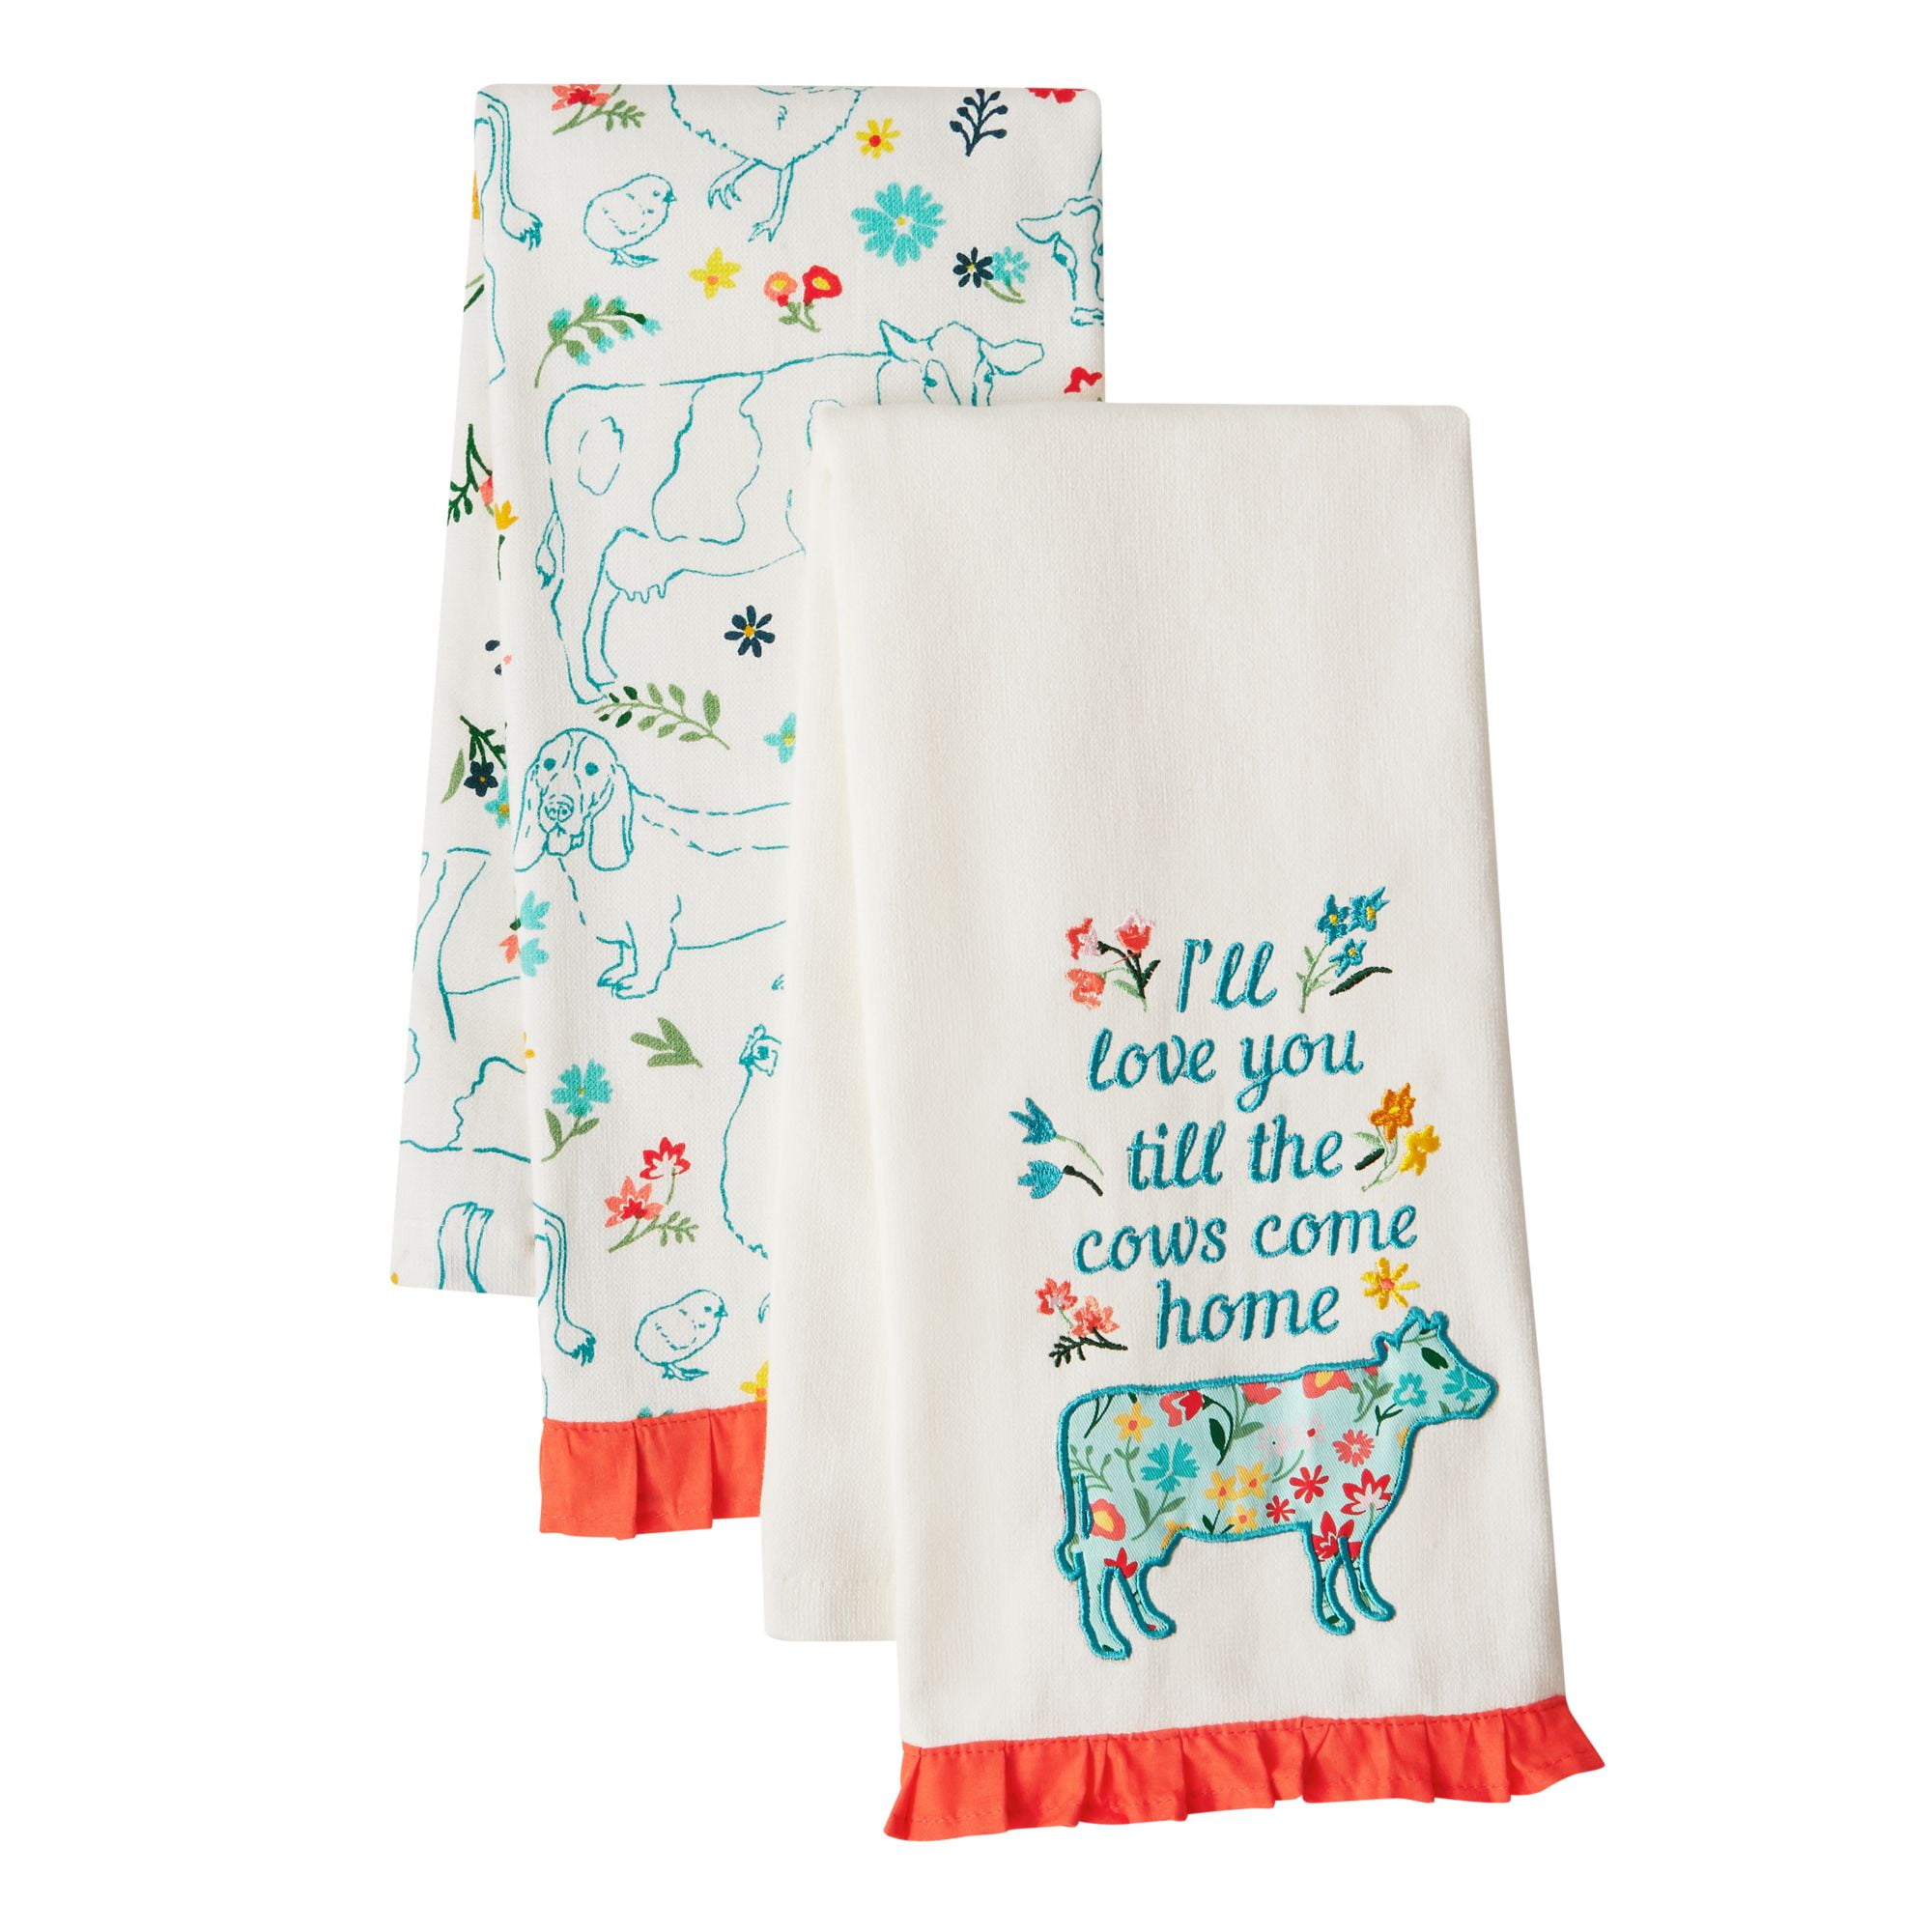 The Pioneer Woman Dish Towels - Coordinates with her Dinnerware